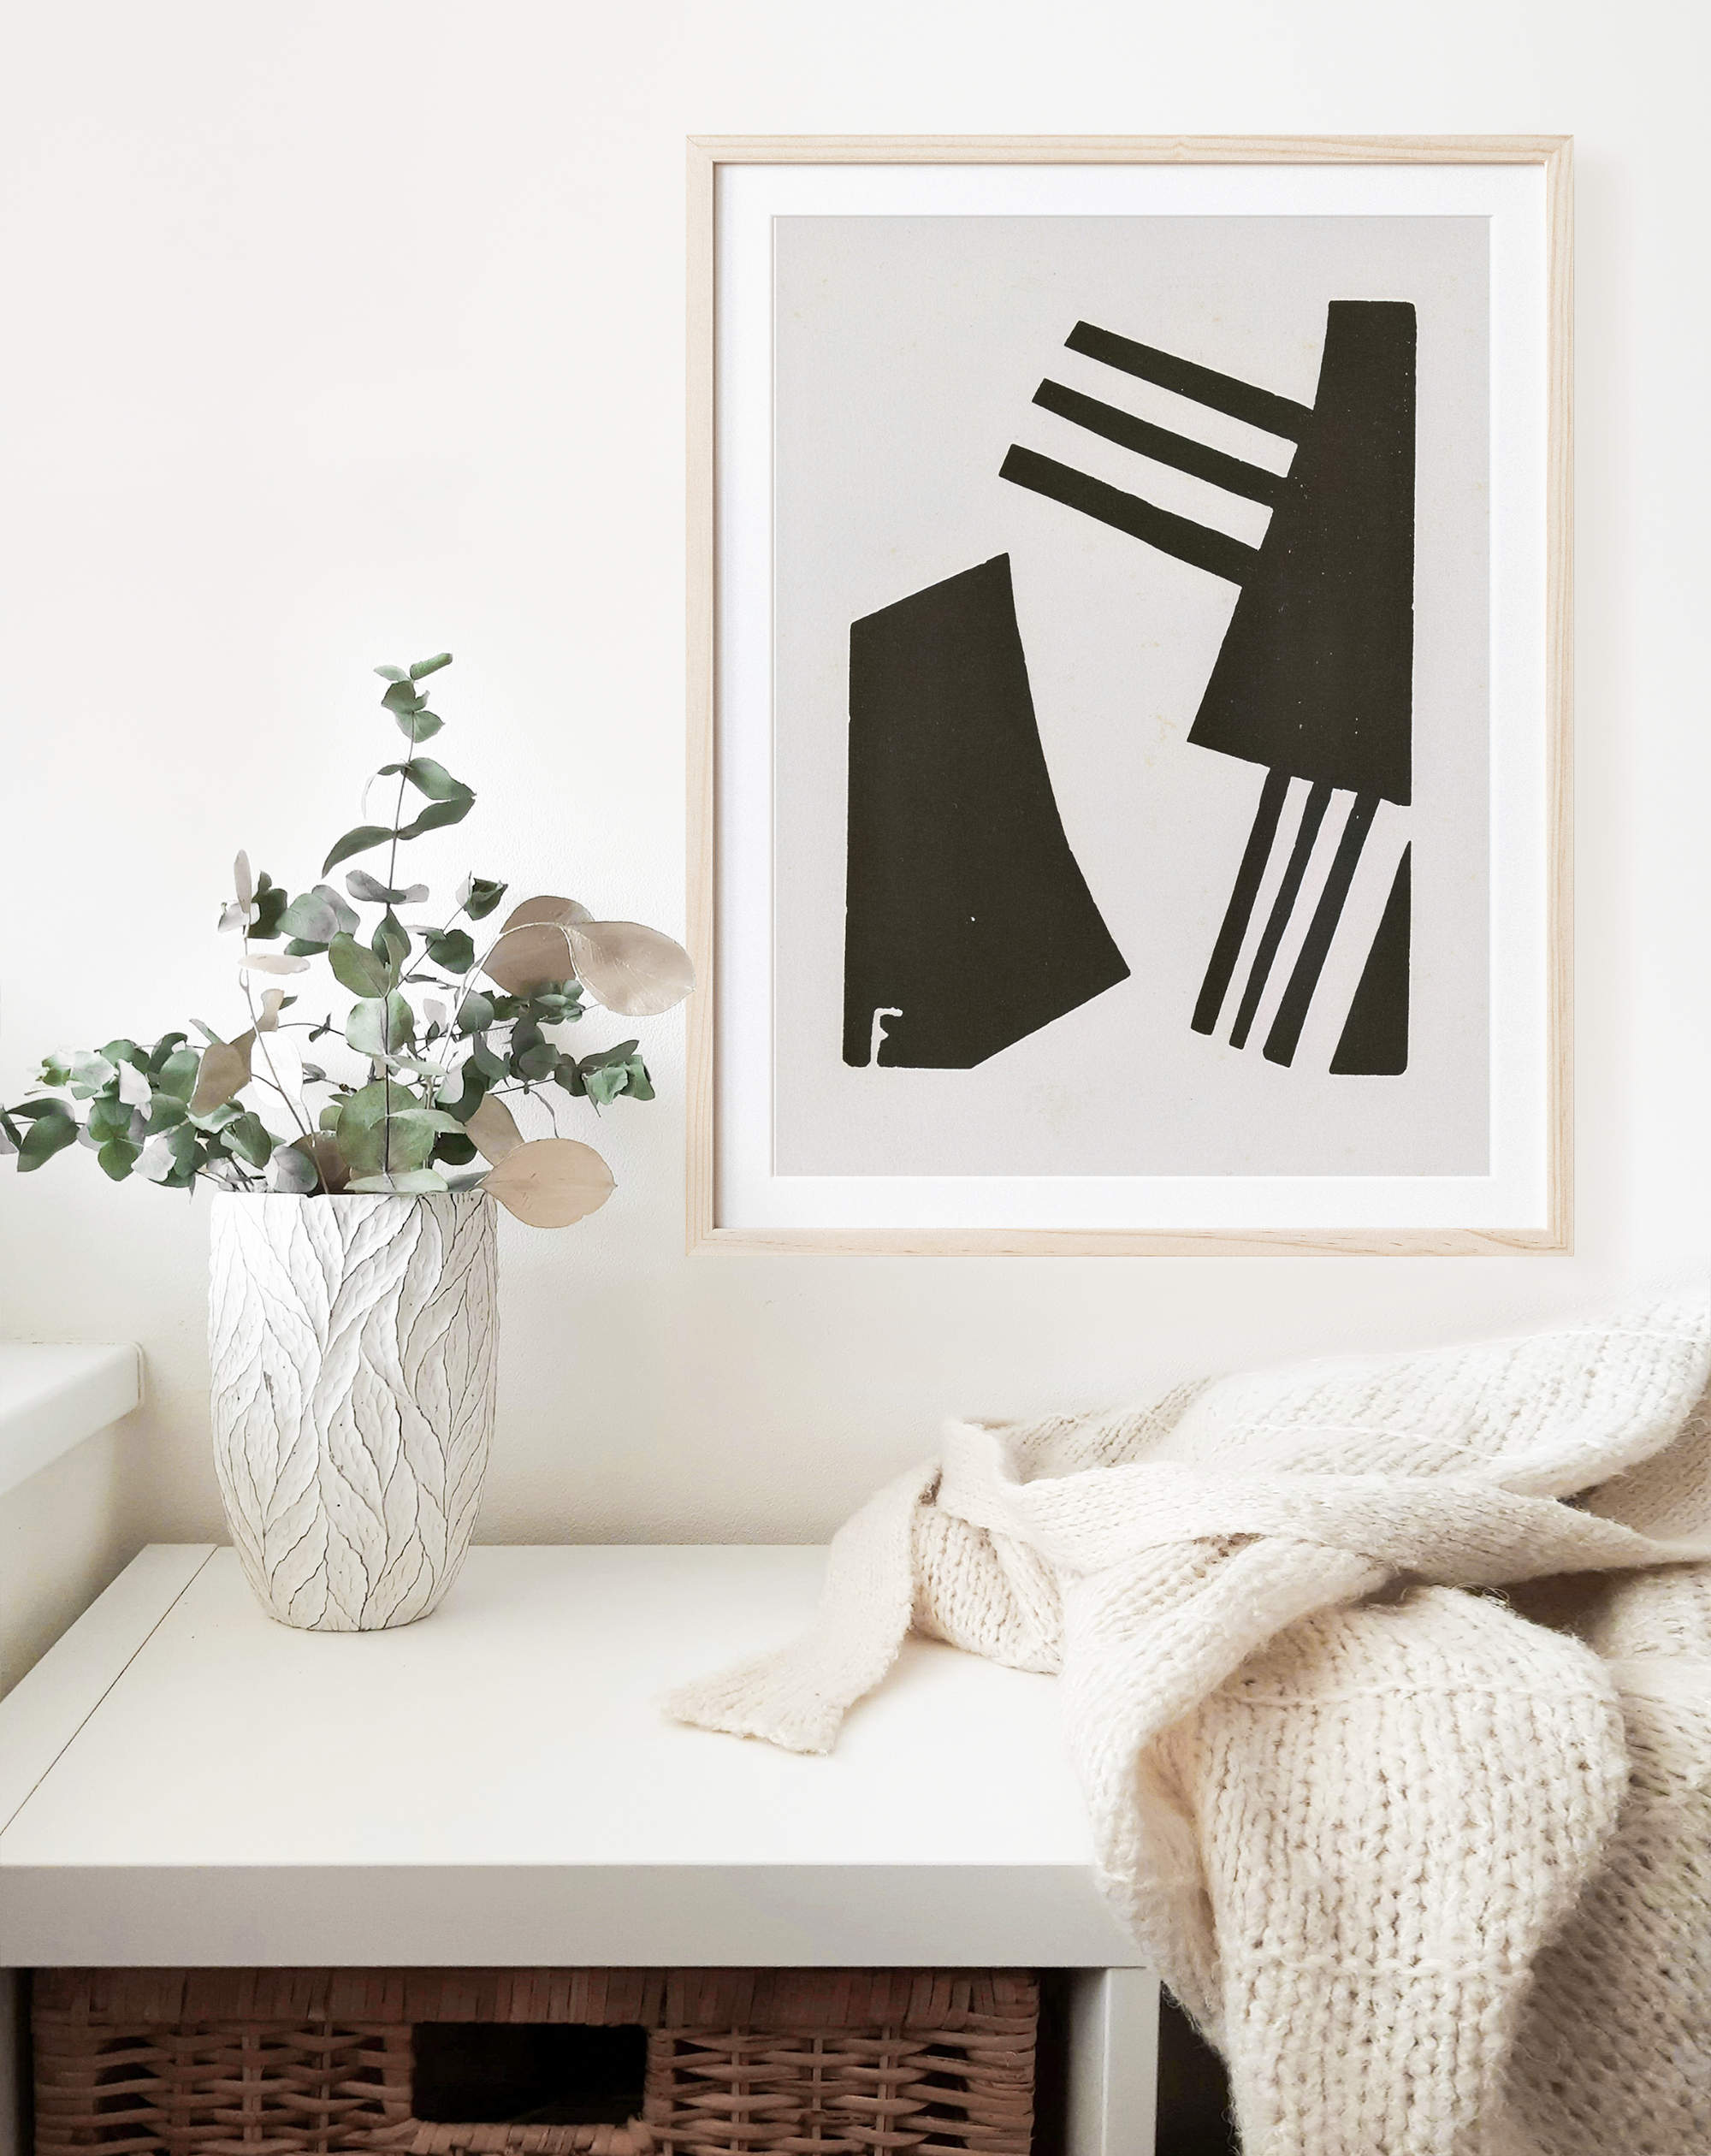 black and white abstract art hanging in natural wood frame on wall